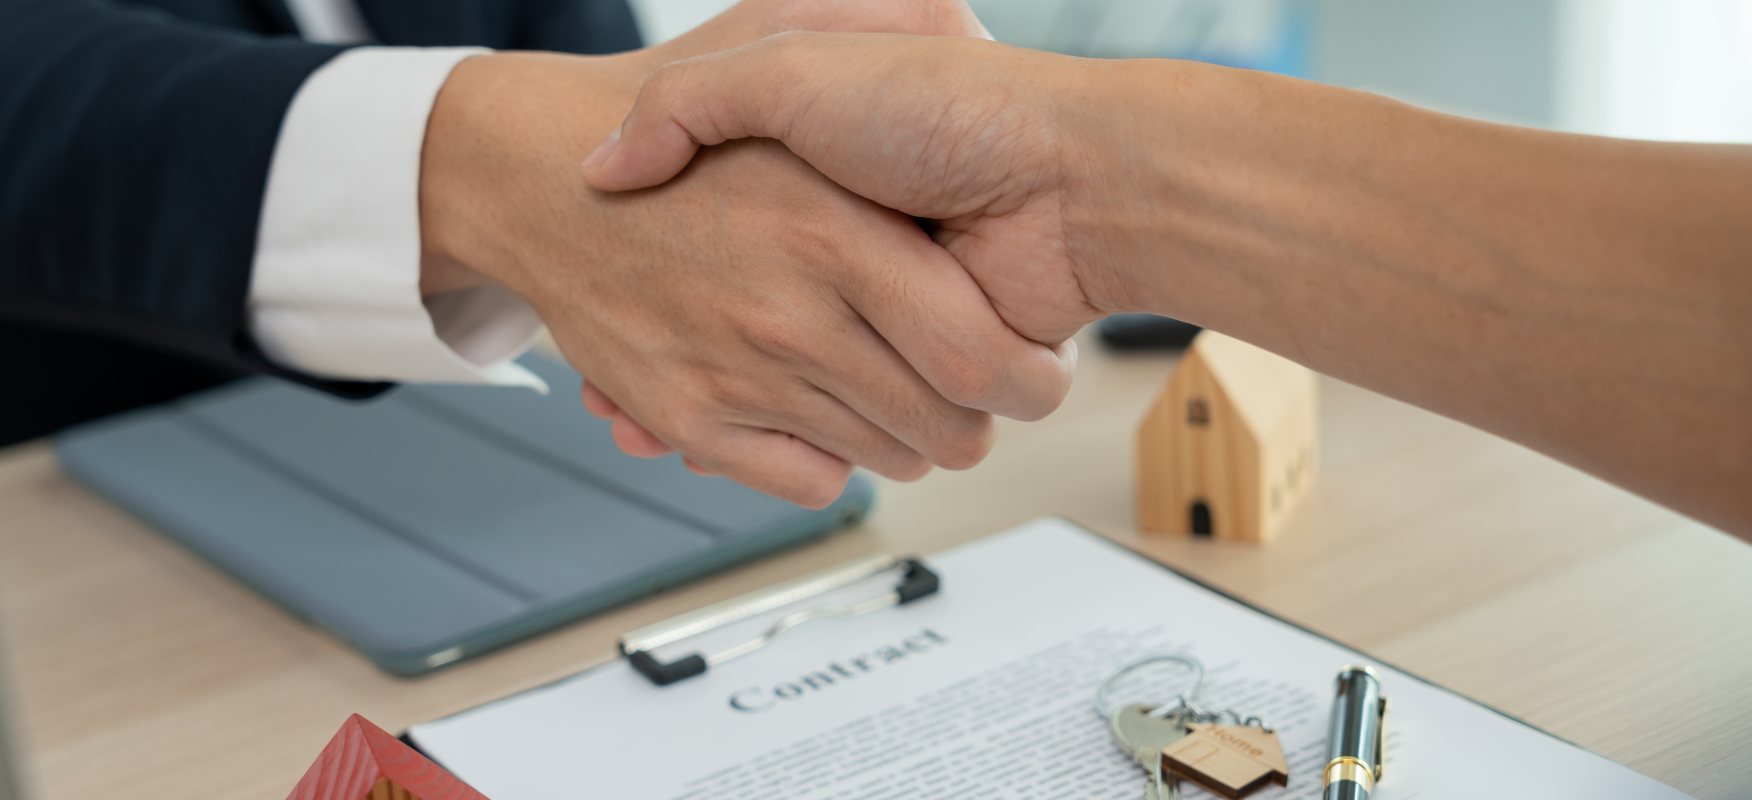 Real estate handshake over contract with house keys and wooden model home, symbolizing successful apartment building sale in Ohio.